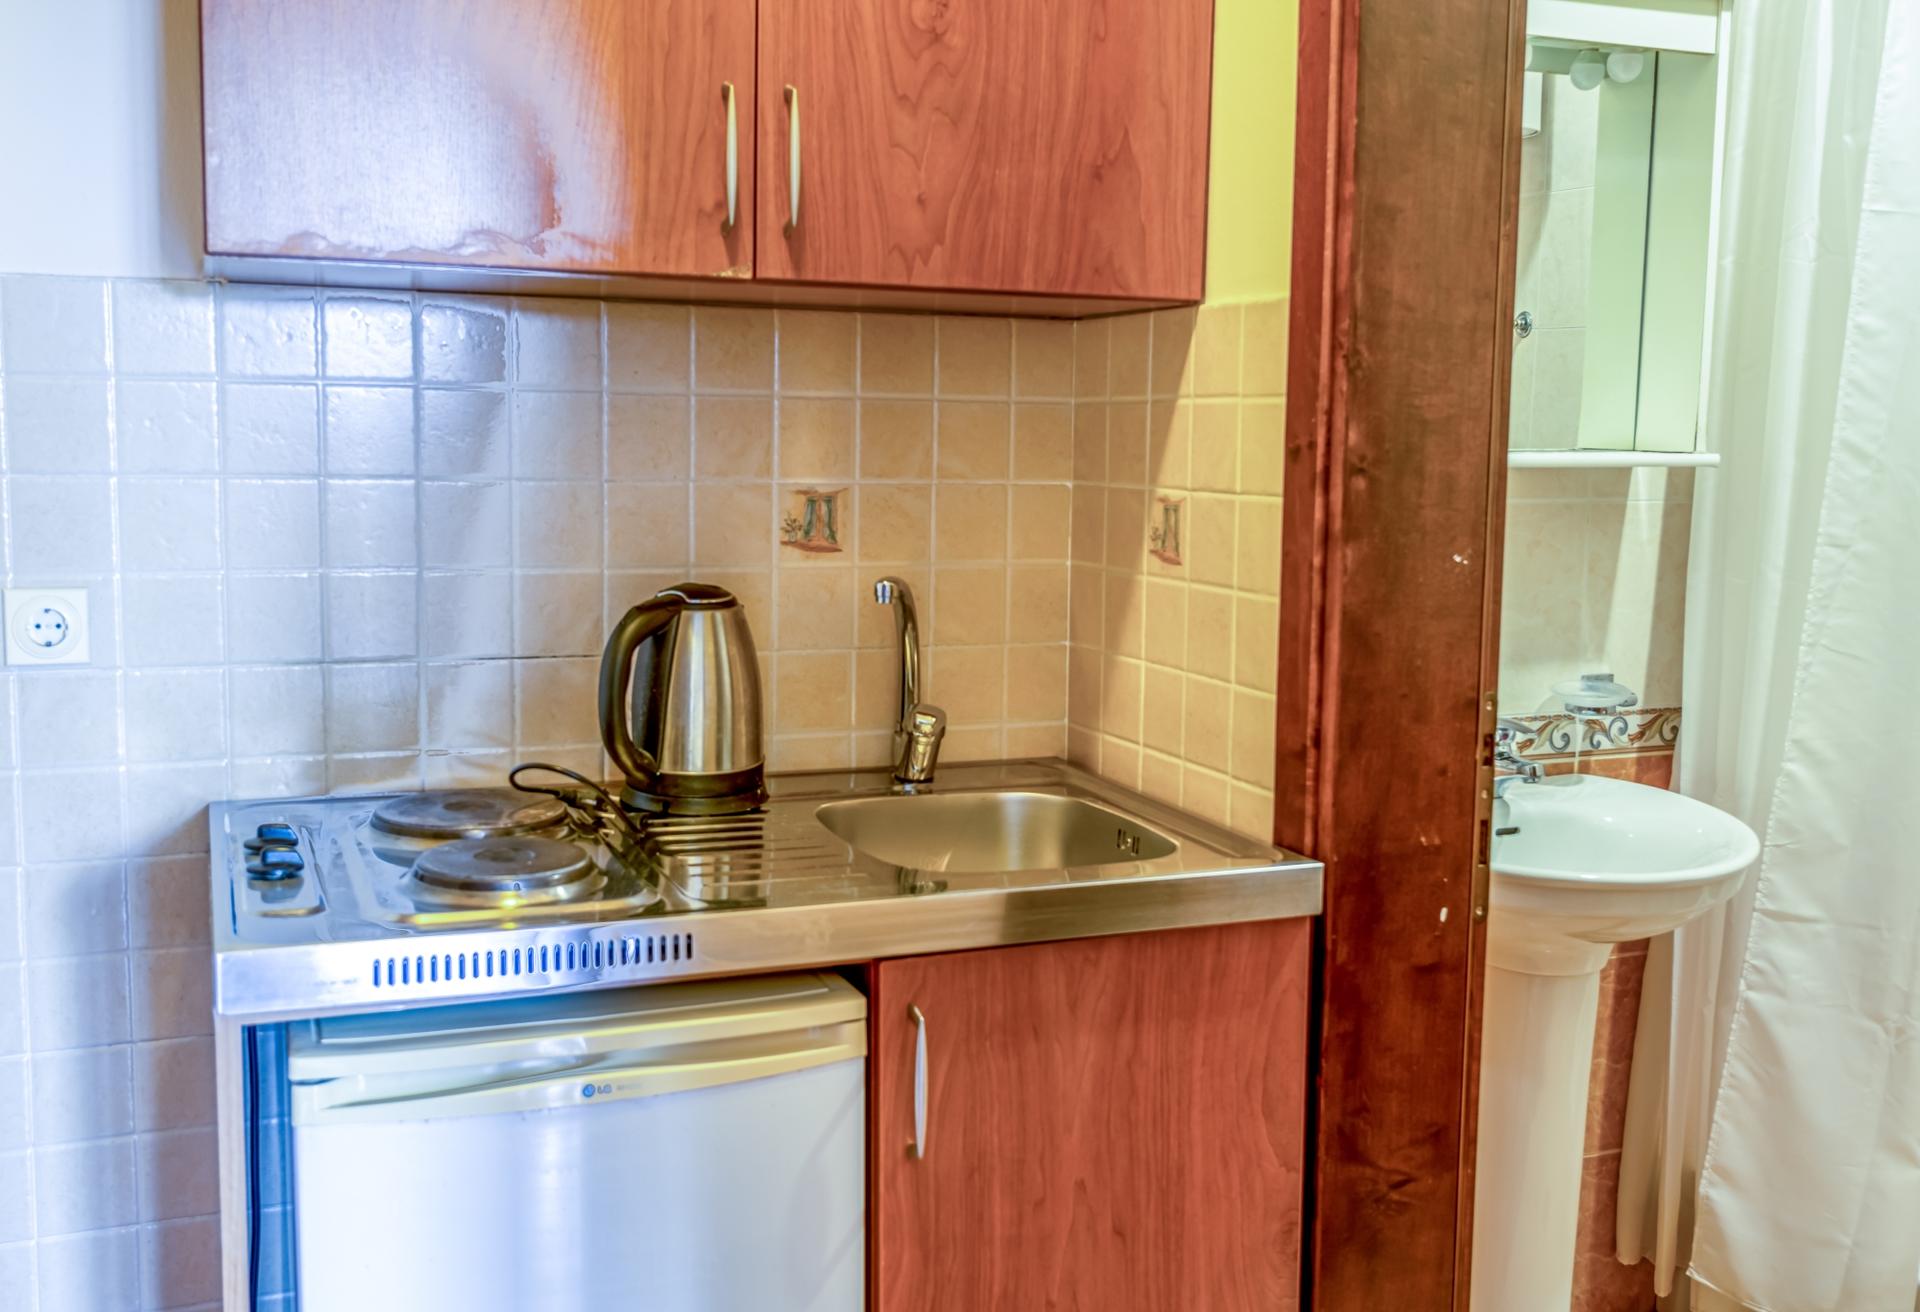 You will have access to a mini fridge, kettle, electric cooktop, and other essentials to prepare quick snacks.